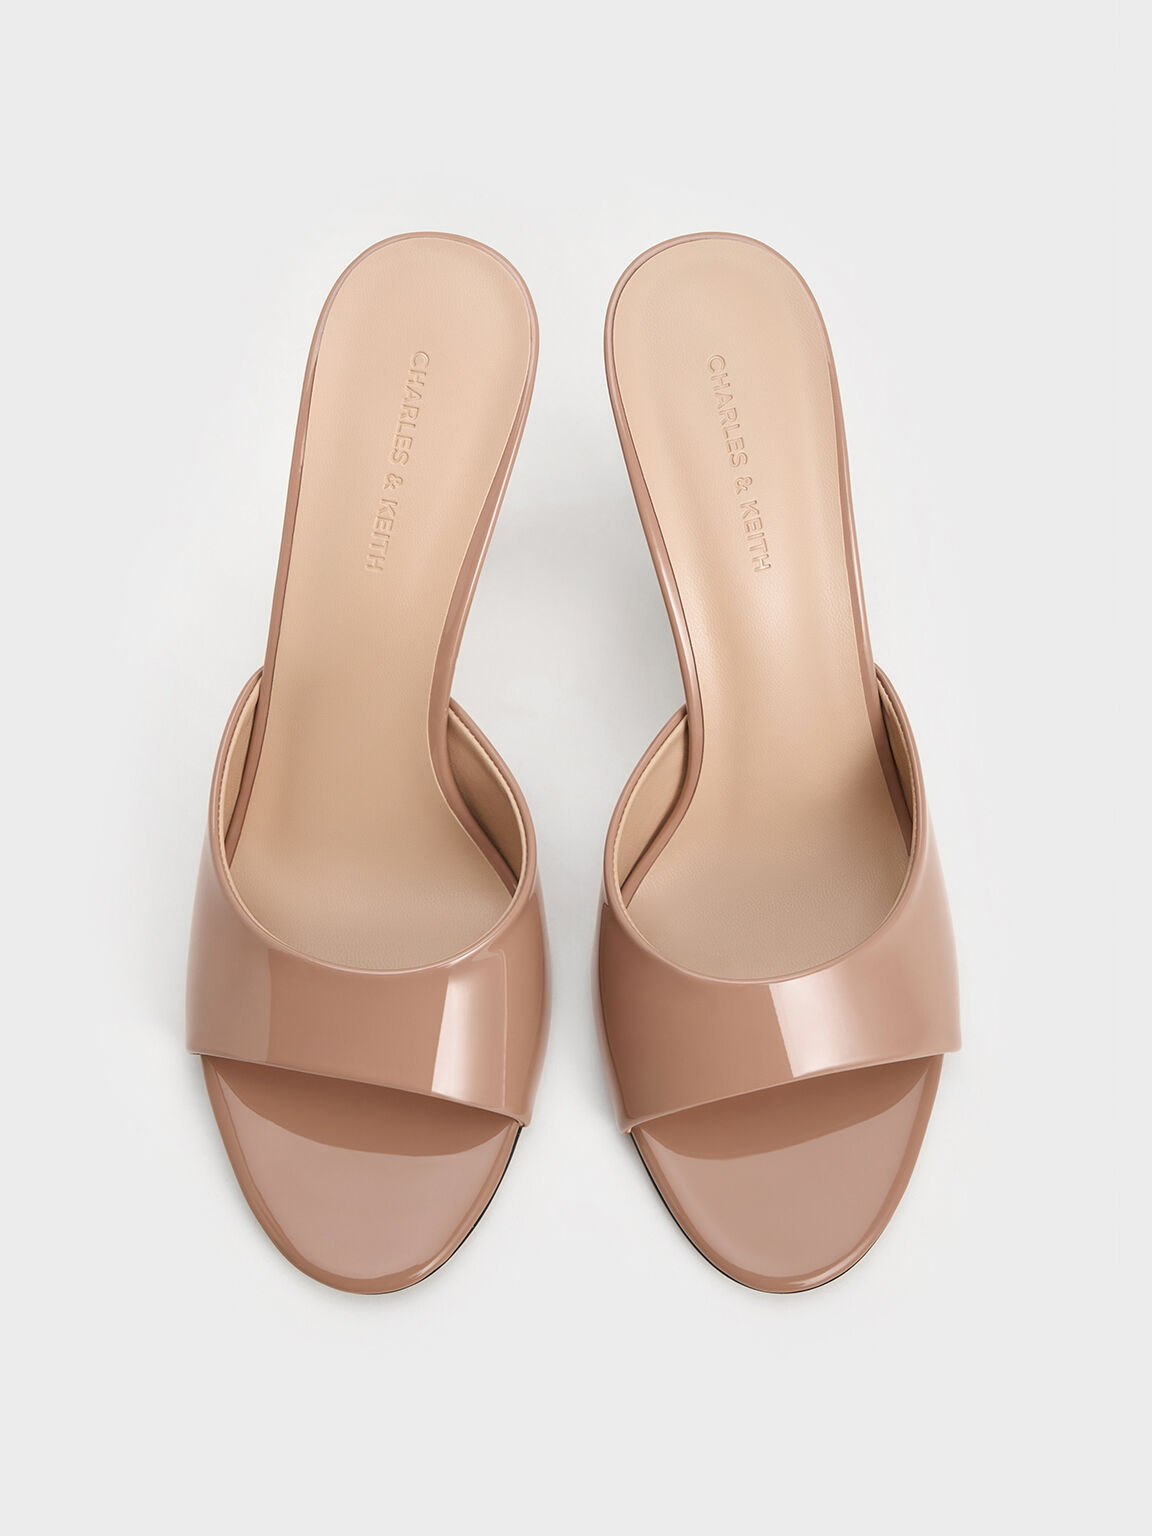 Nude Patent Open-Toe Heeled Mules - CHARLES & KEITH MT